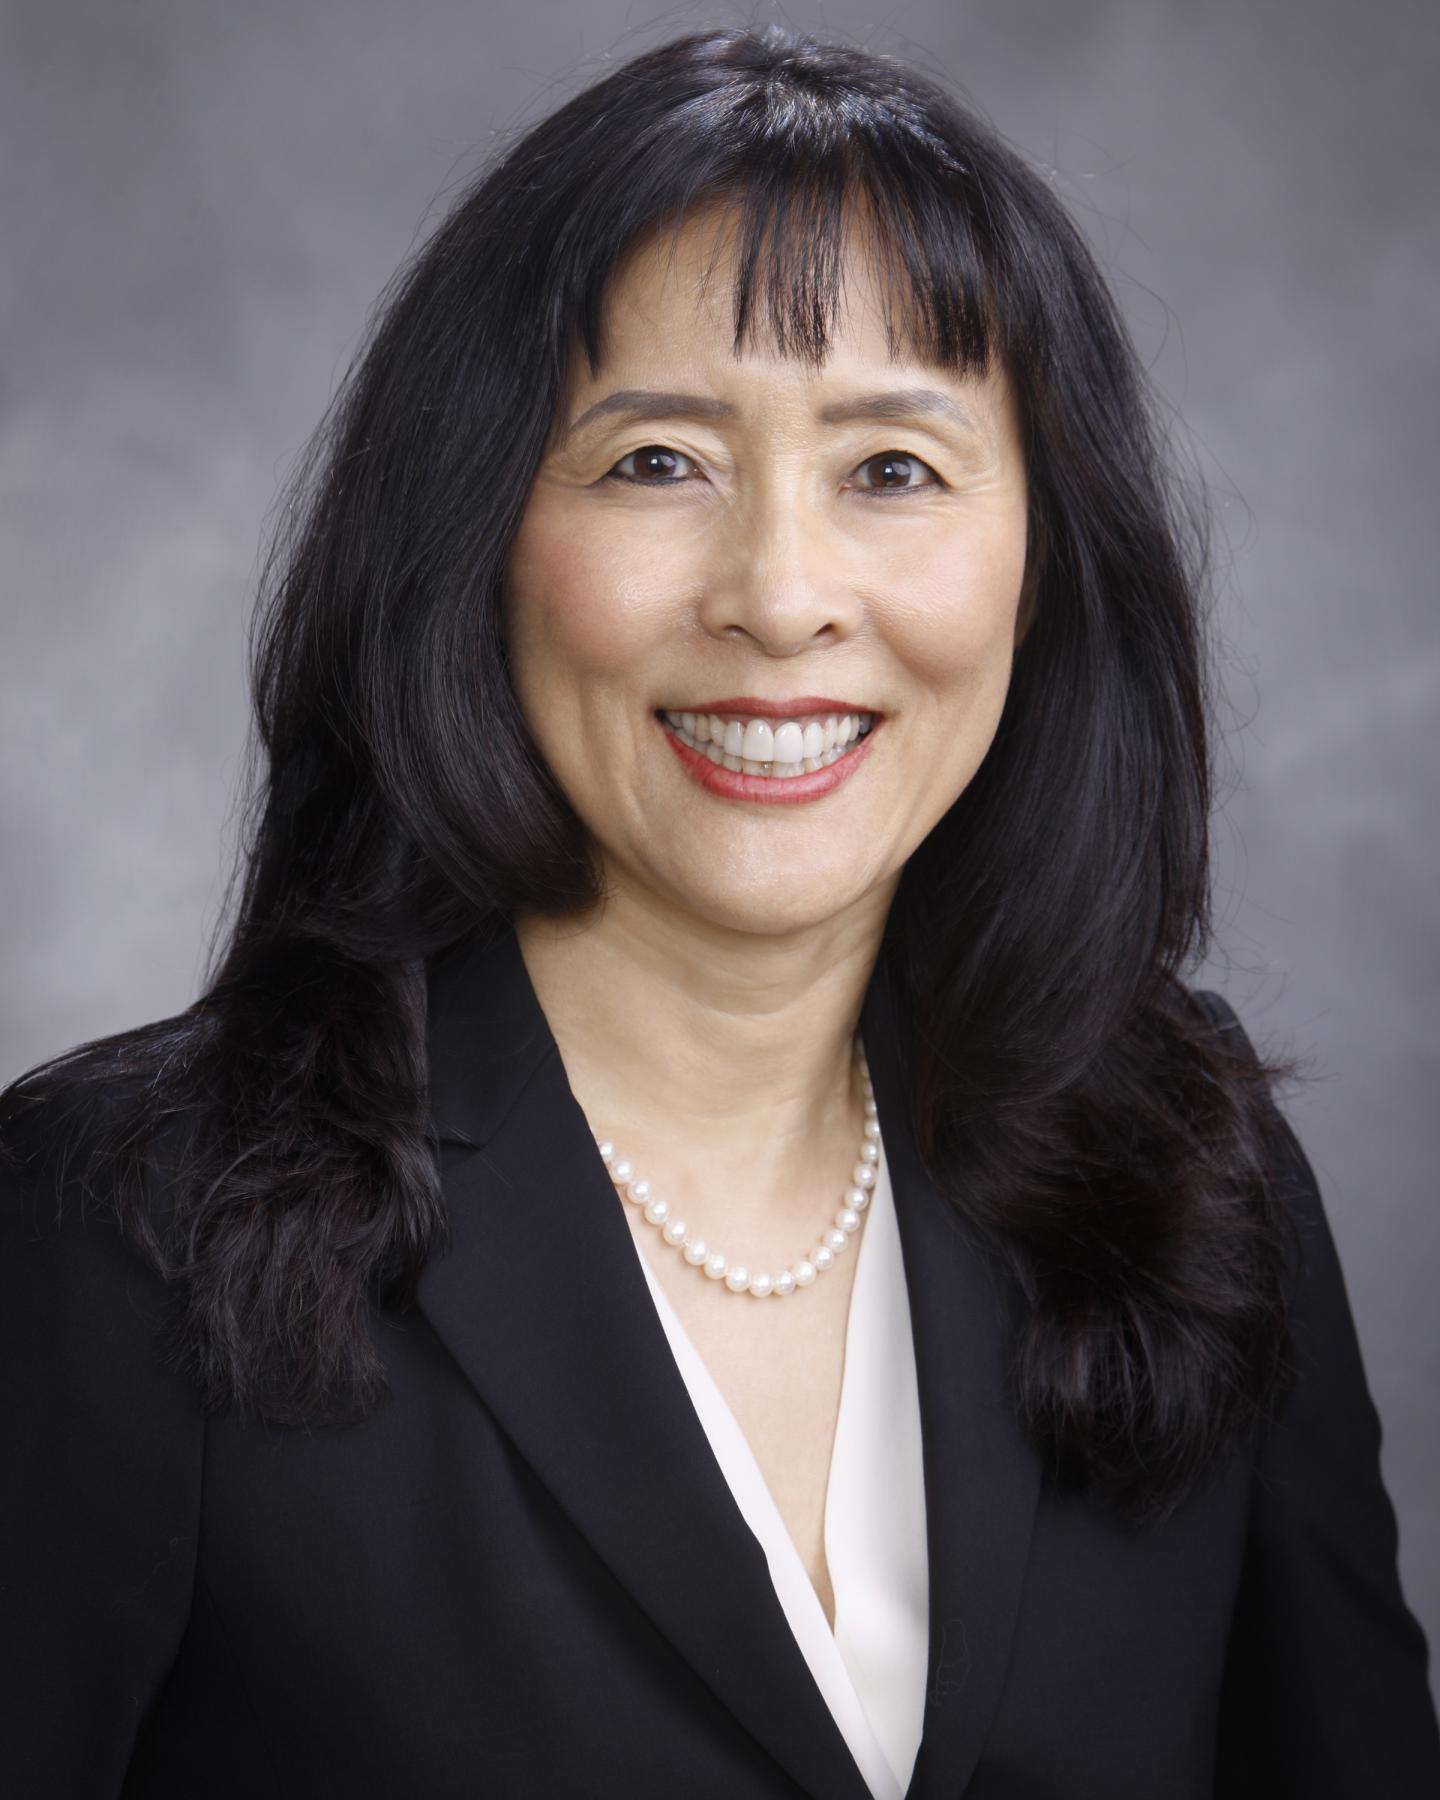 Jacqueline Chen Receives  2018 Achievement Award from the Society of Women Engineers